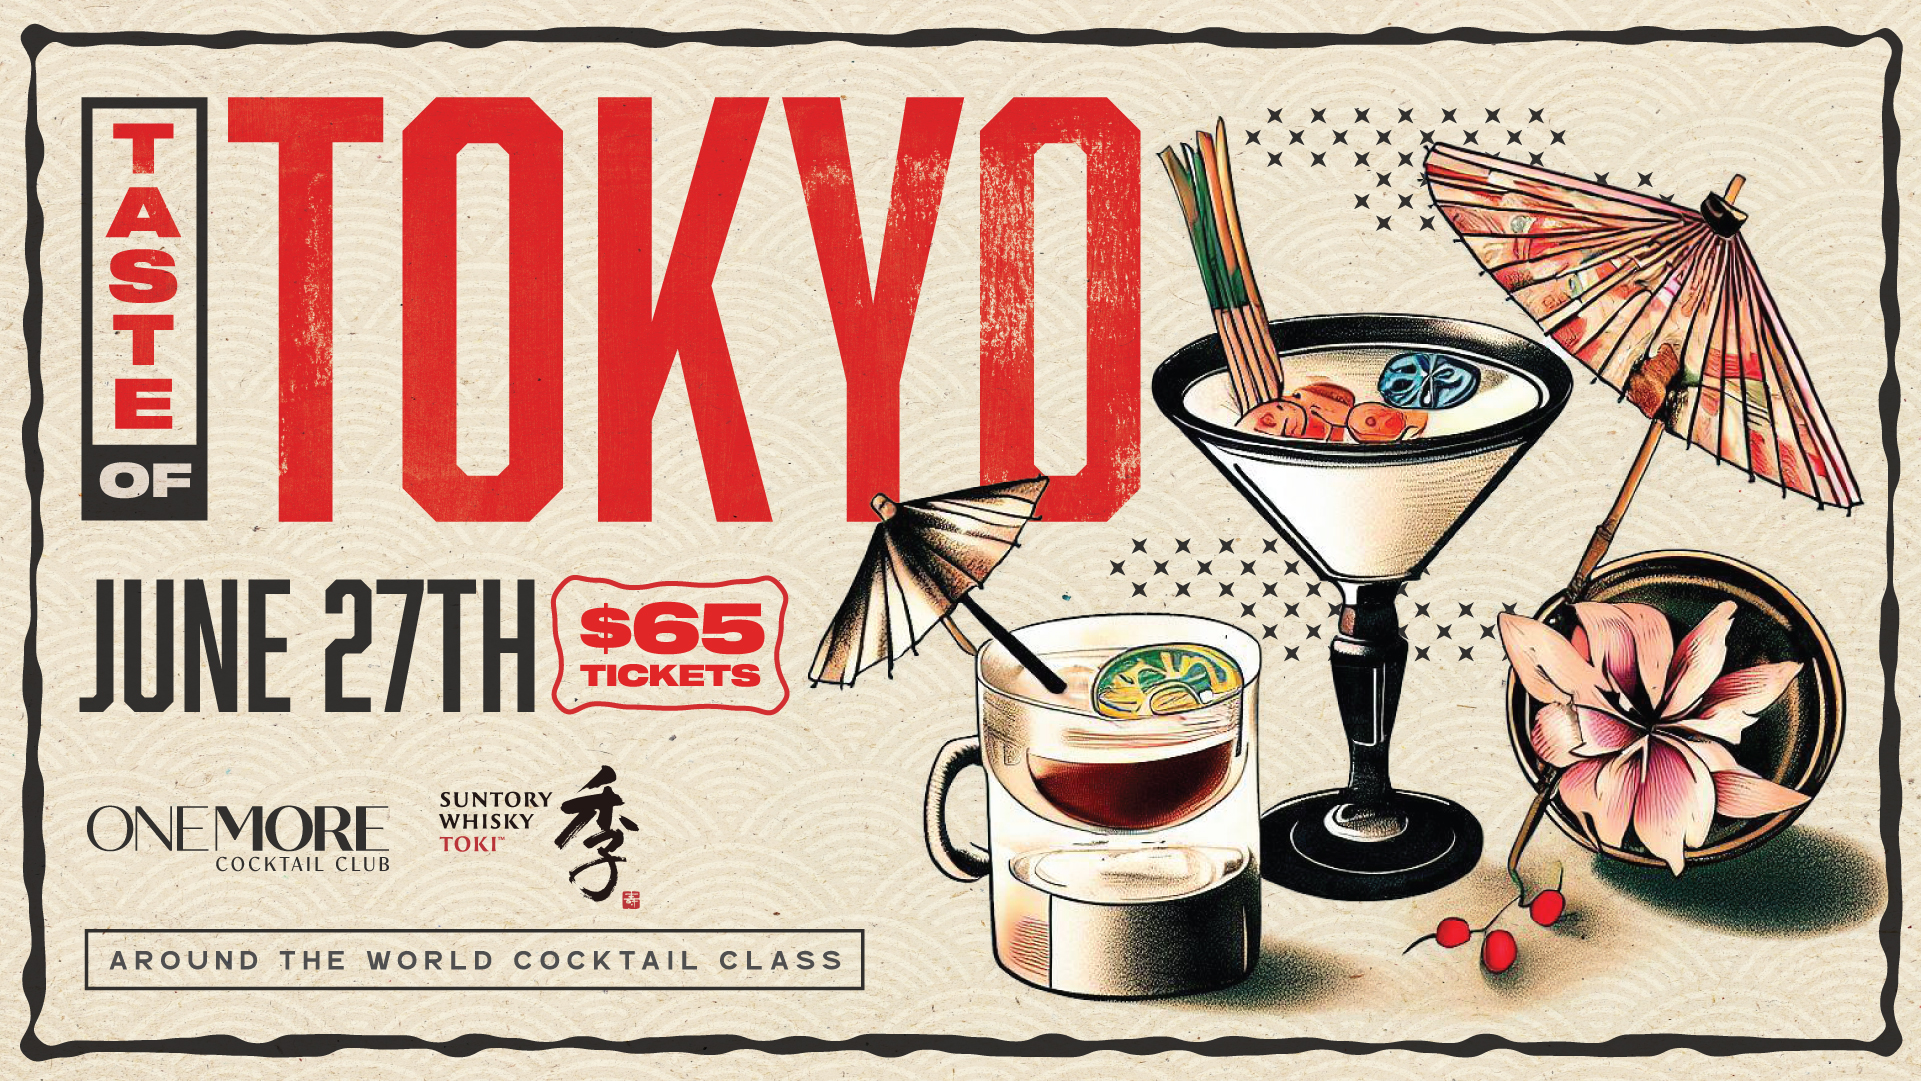 Promo image of Around The World Cocktail Class | Taste of Tokyo